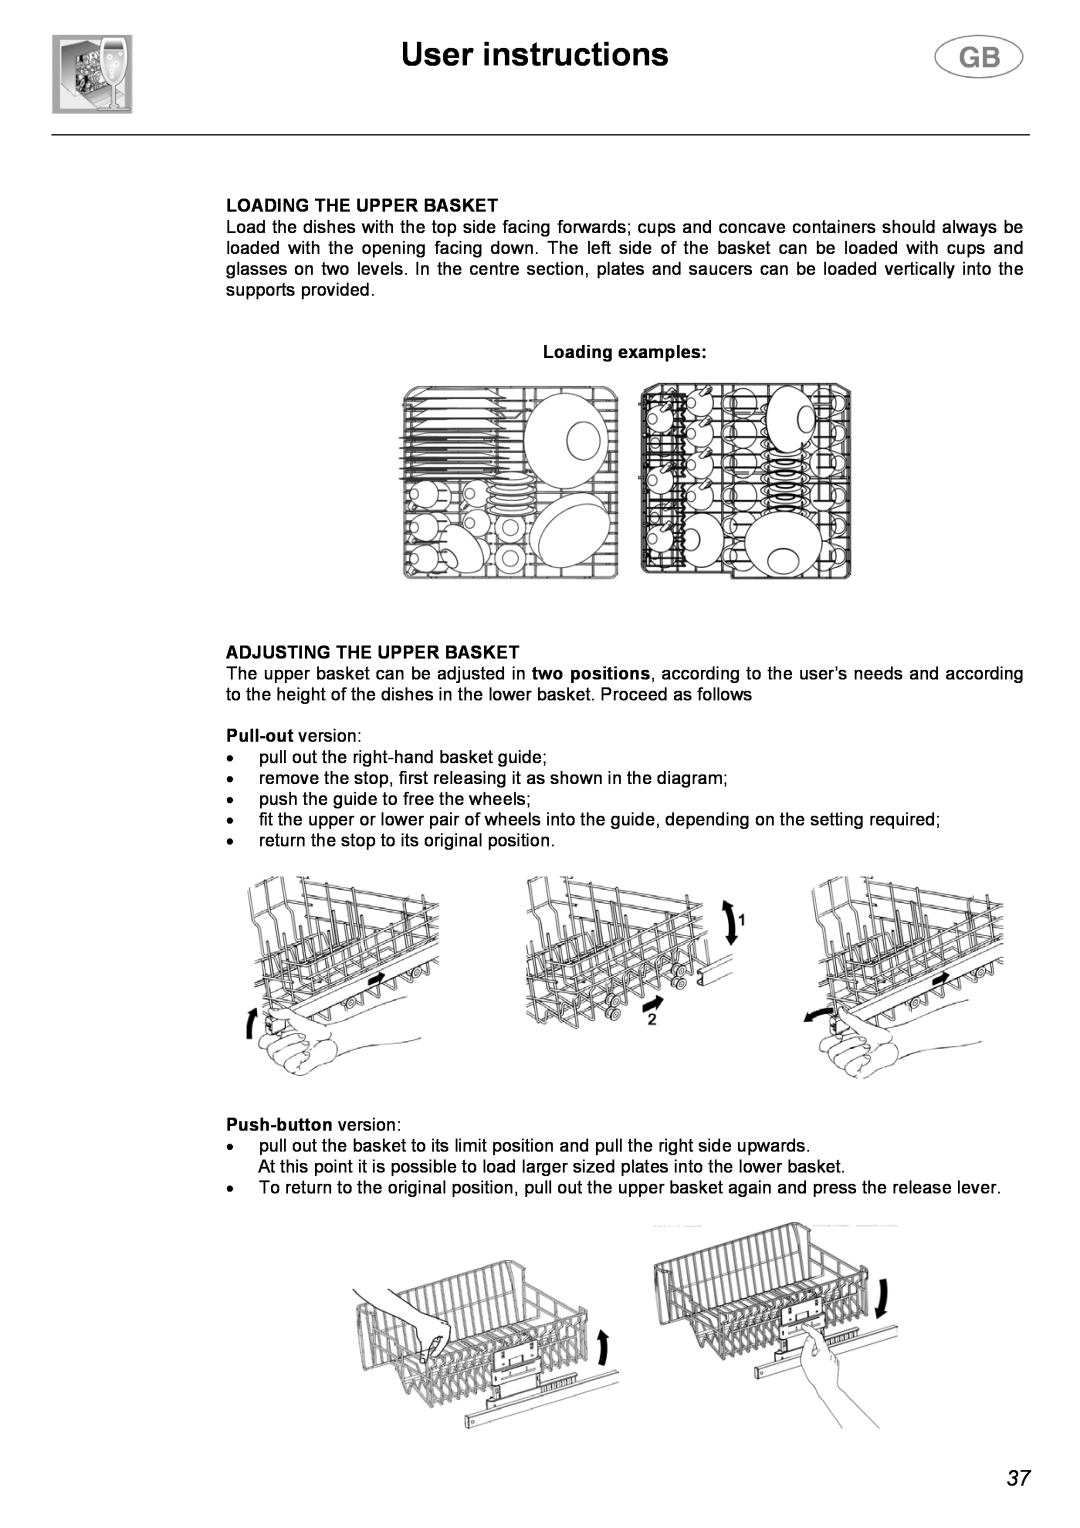 Smeg DWD63BLE User instructions, Loading The Upper Basket, Loading examples ADJUSTING THE UPPER BASKET, Pull-out version 